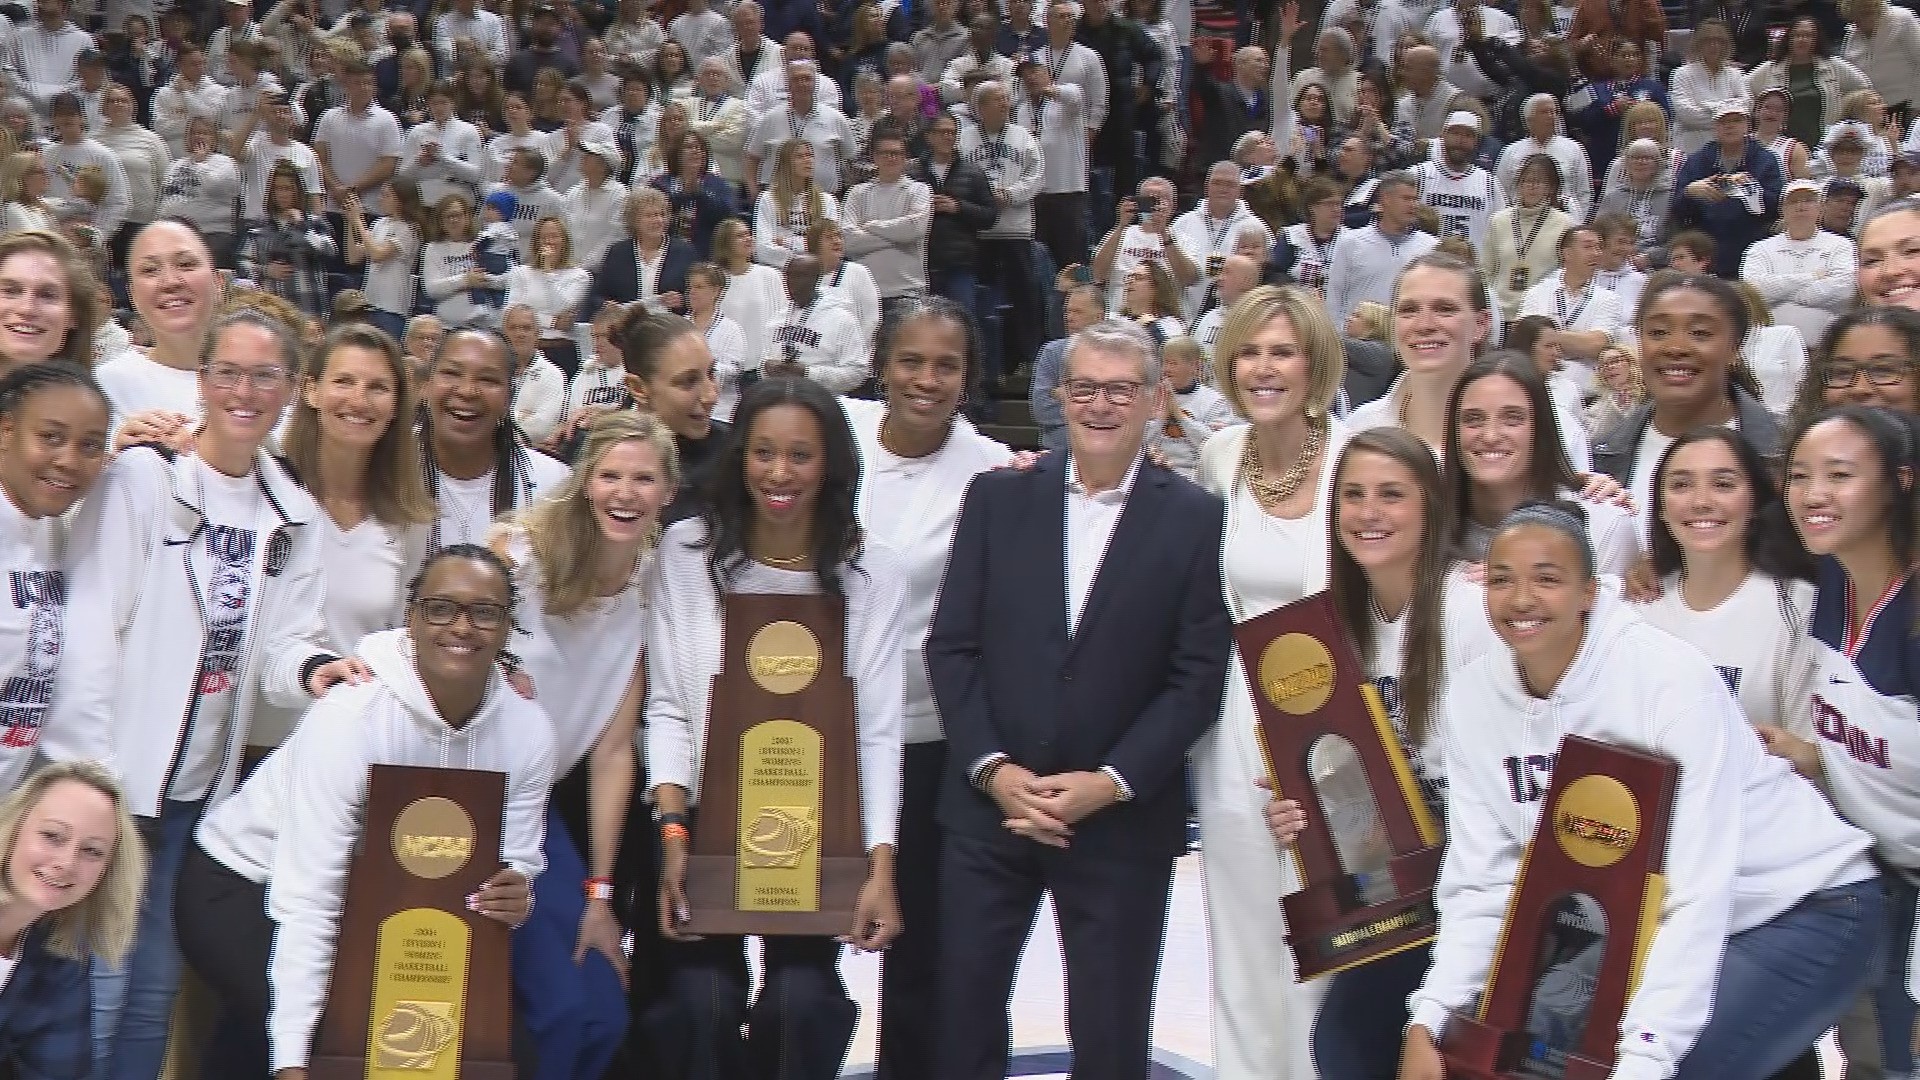 UConn championship teams '03, '04, '13, '14 honored before the game. The Huskies suffer first loss since December 3.